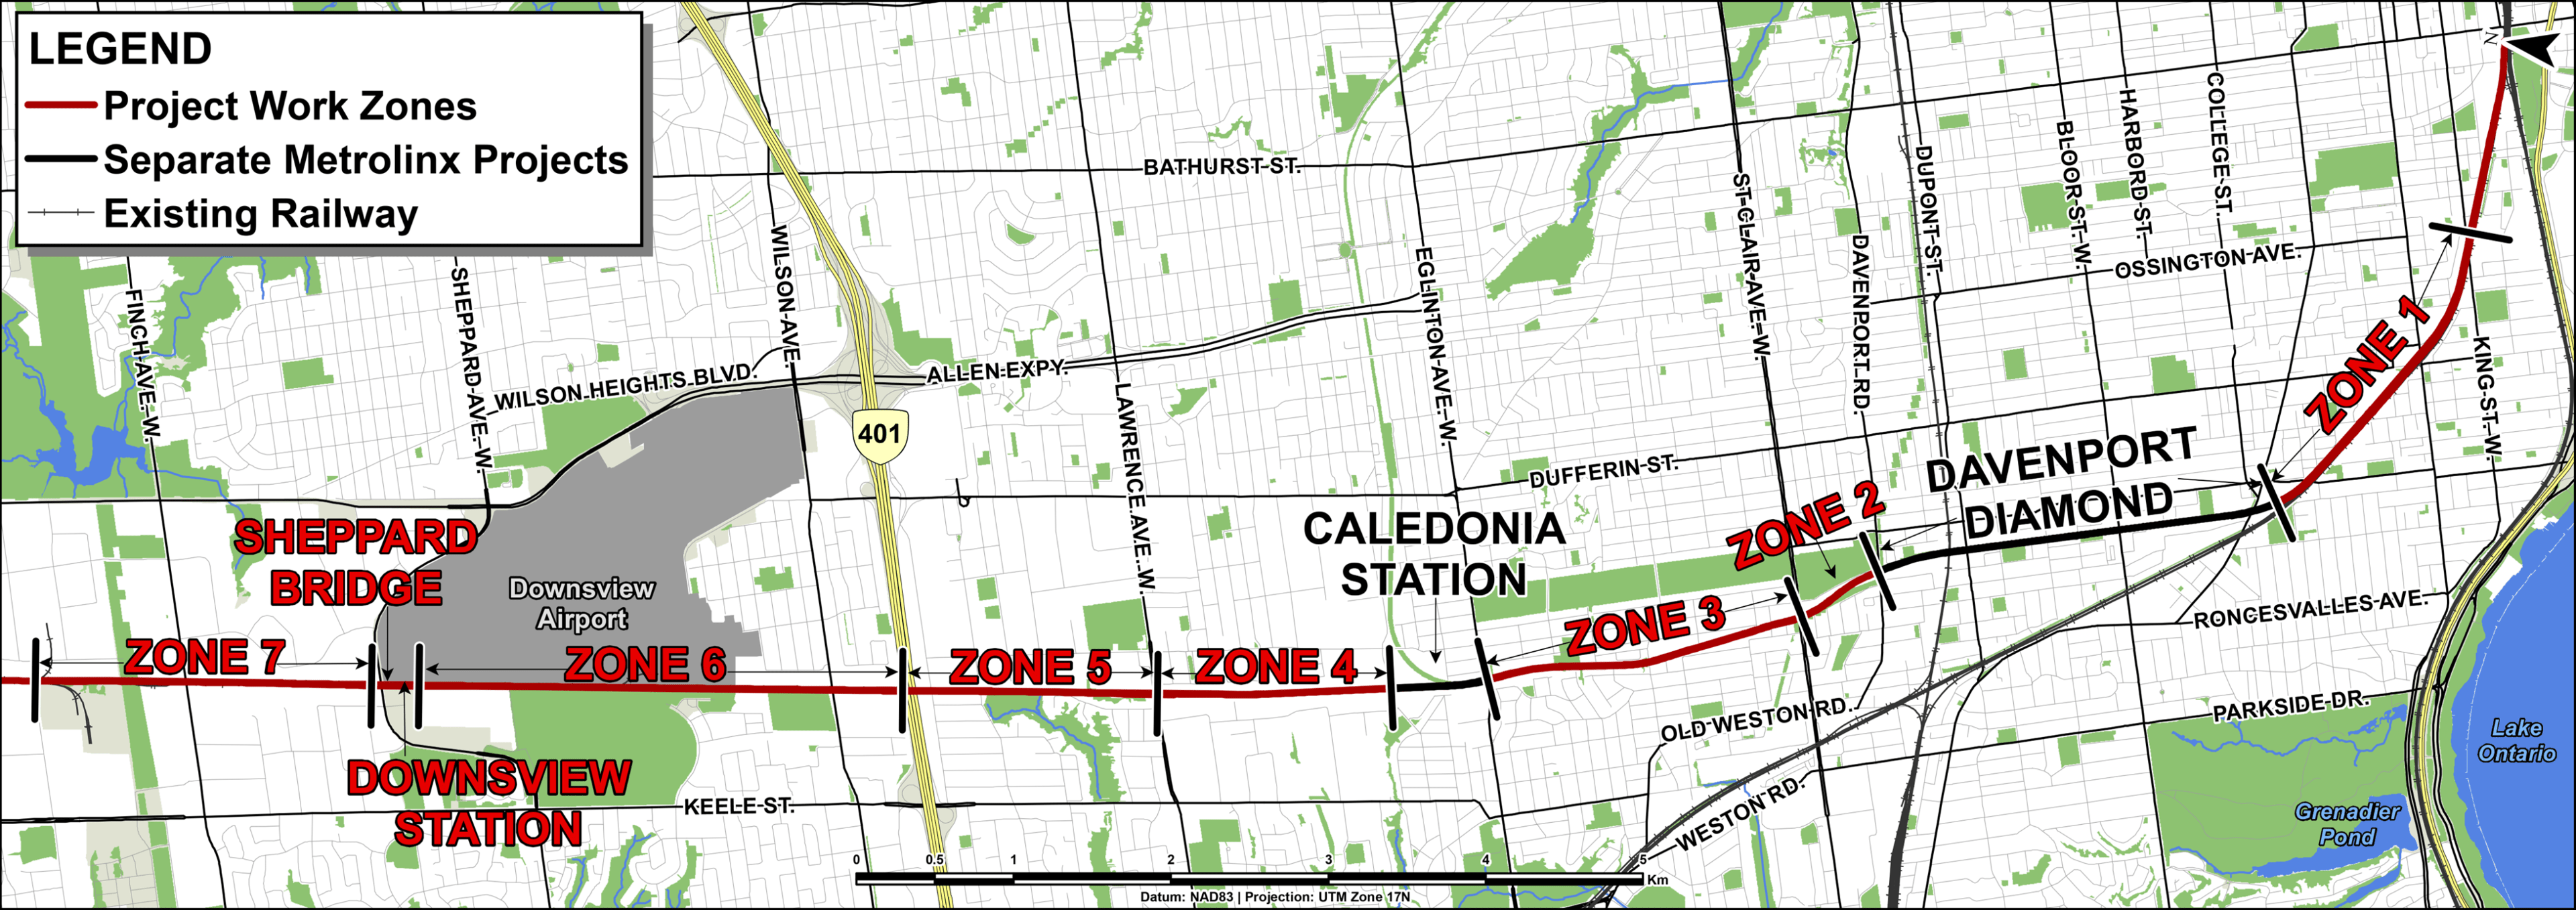 Barrie Line construction work map